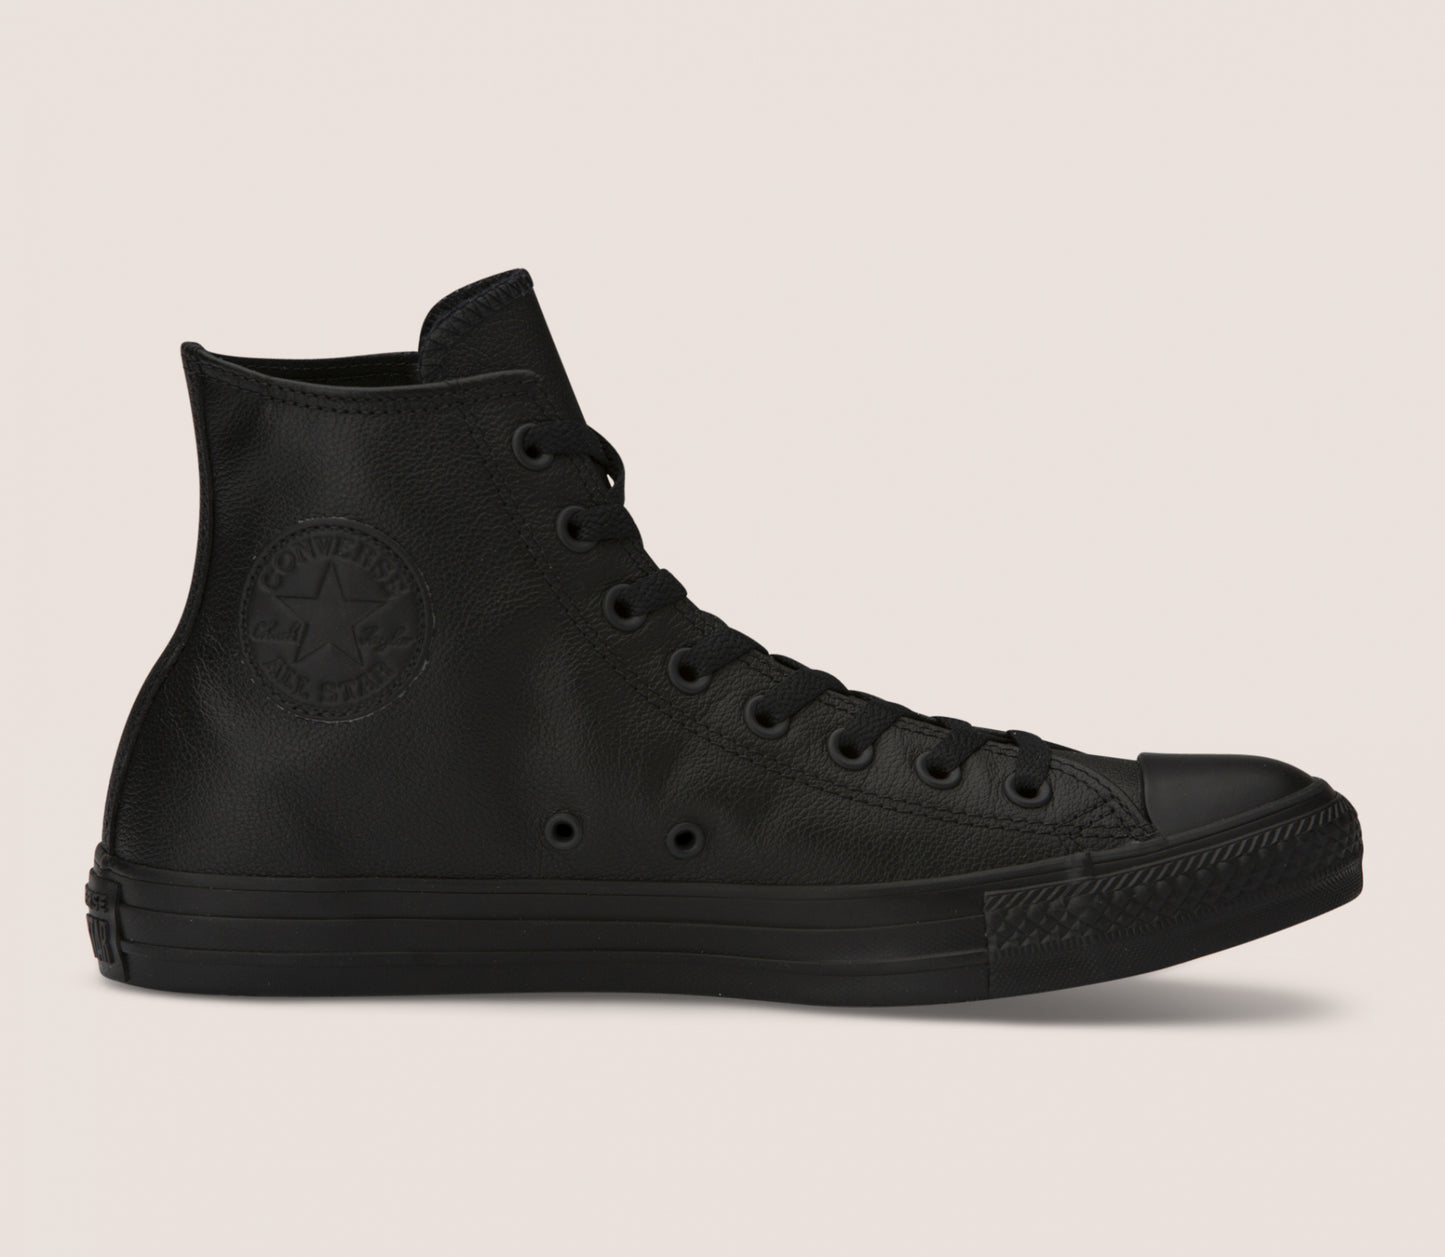 Converse Chuck Taylor All Star Leather High Top Black